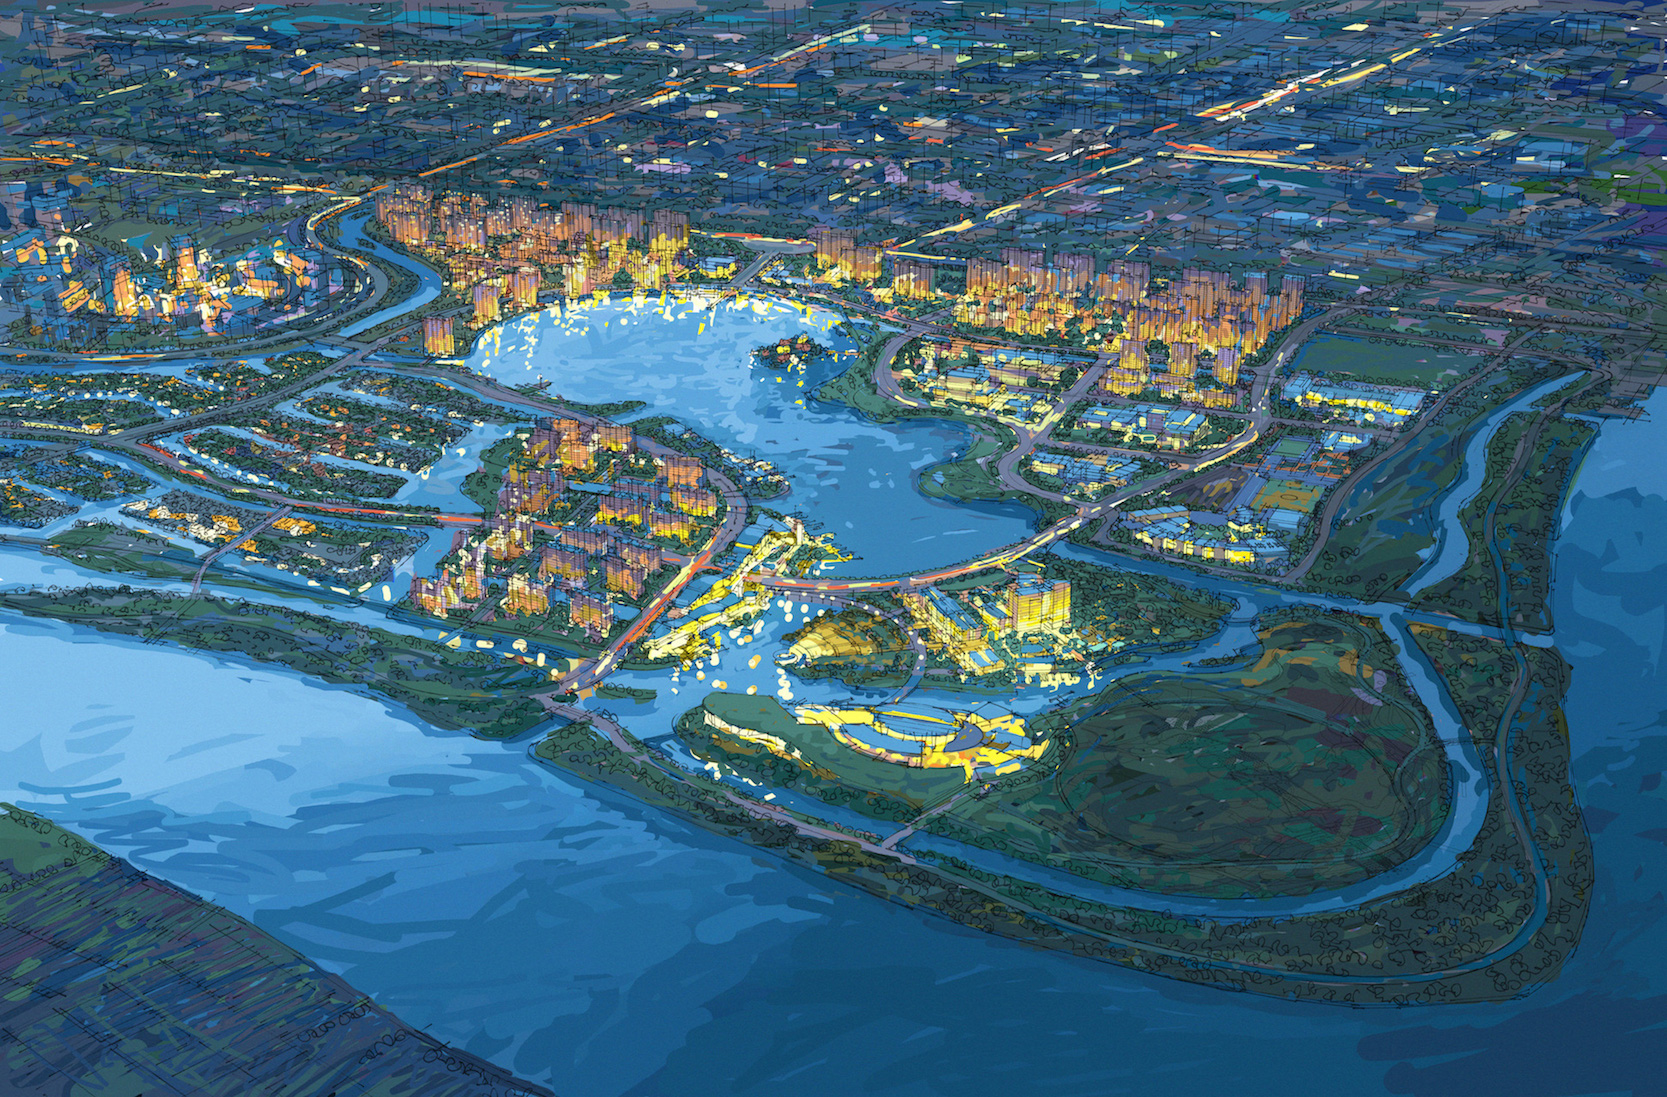 Rendering of the Zizhua Purple Bay residential community. (Courtesy of Gafcon Inc.)